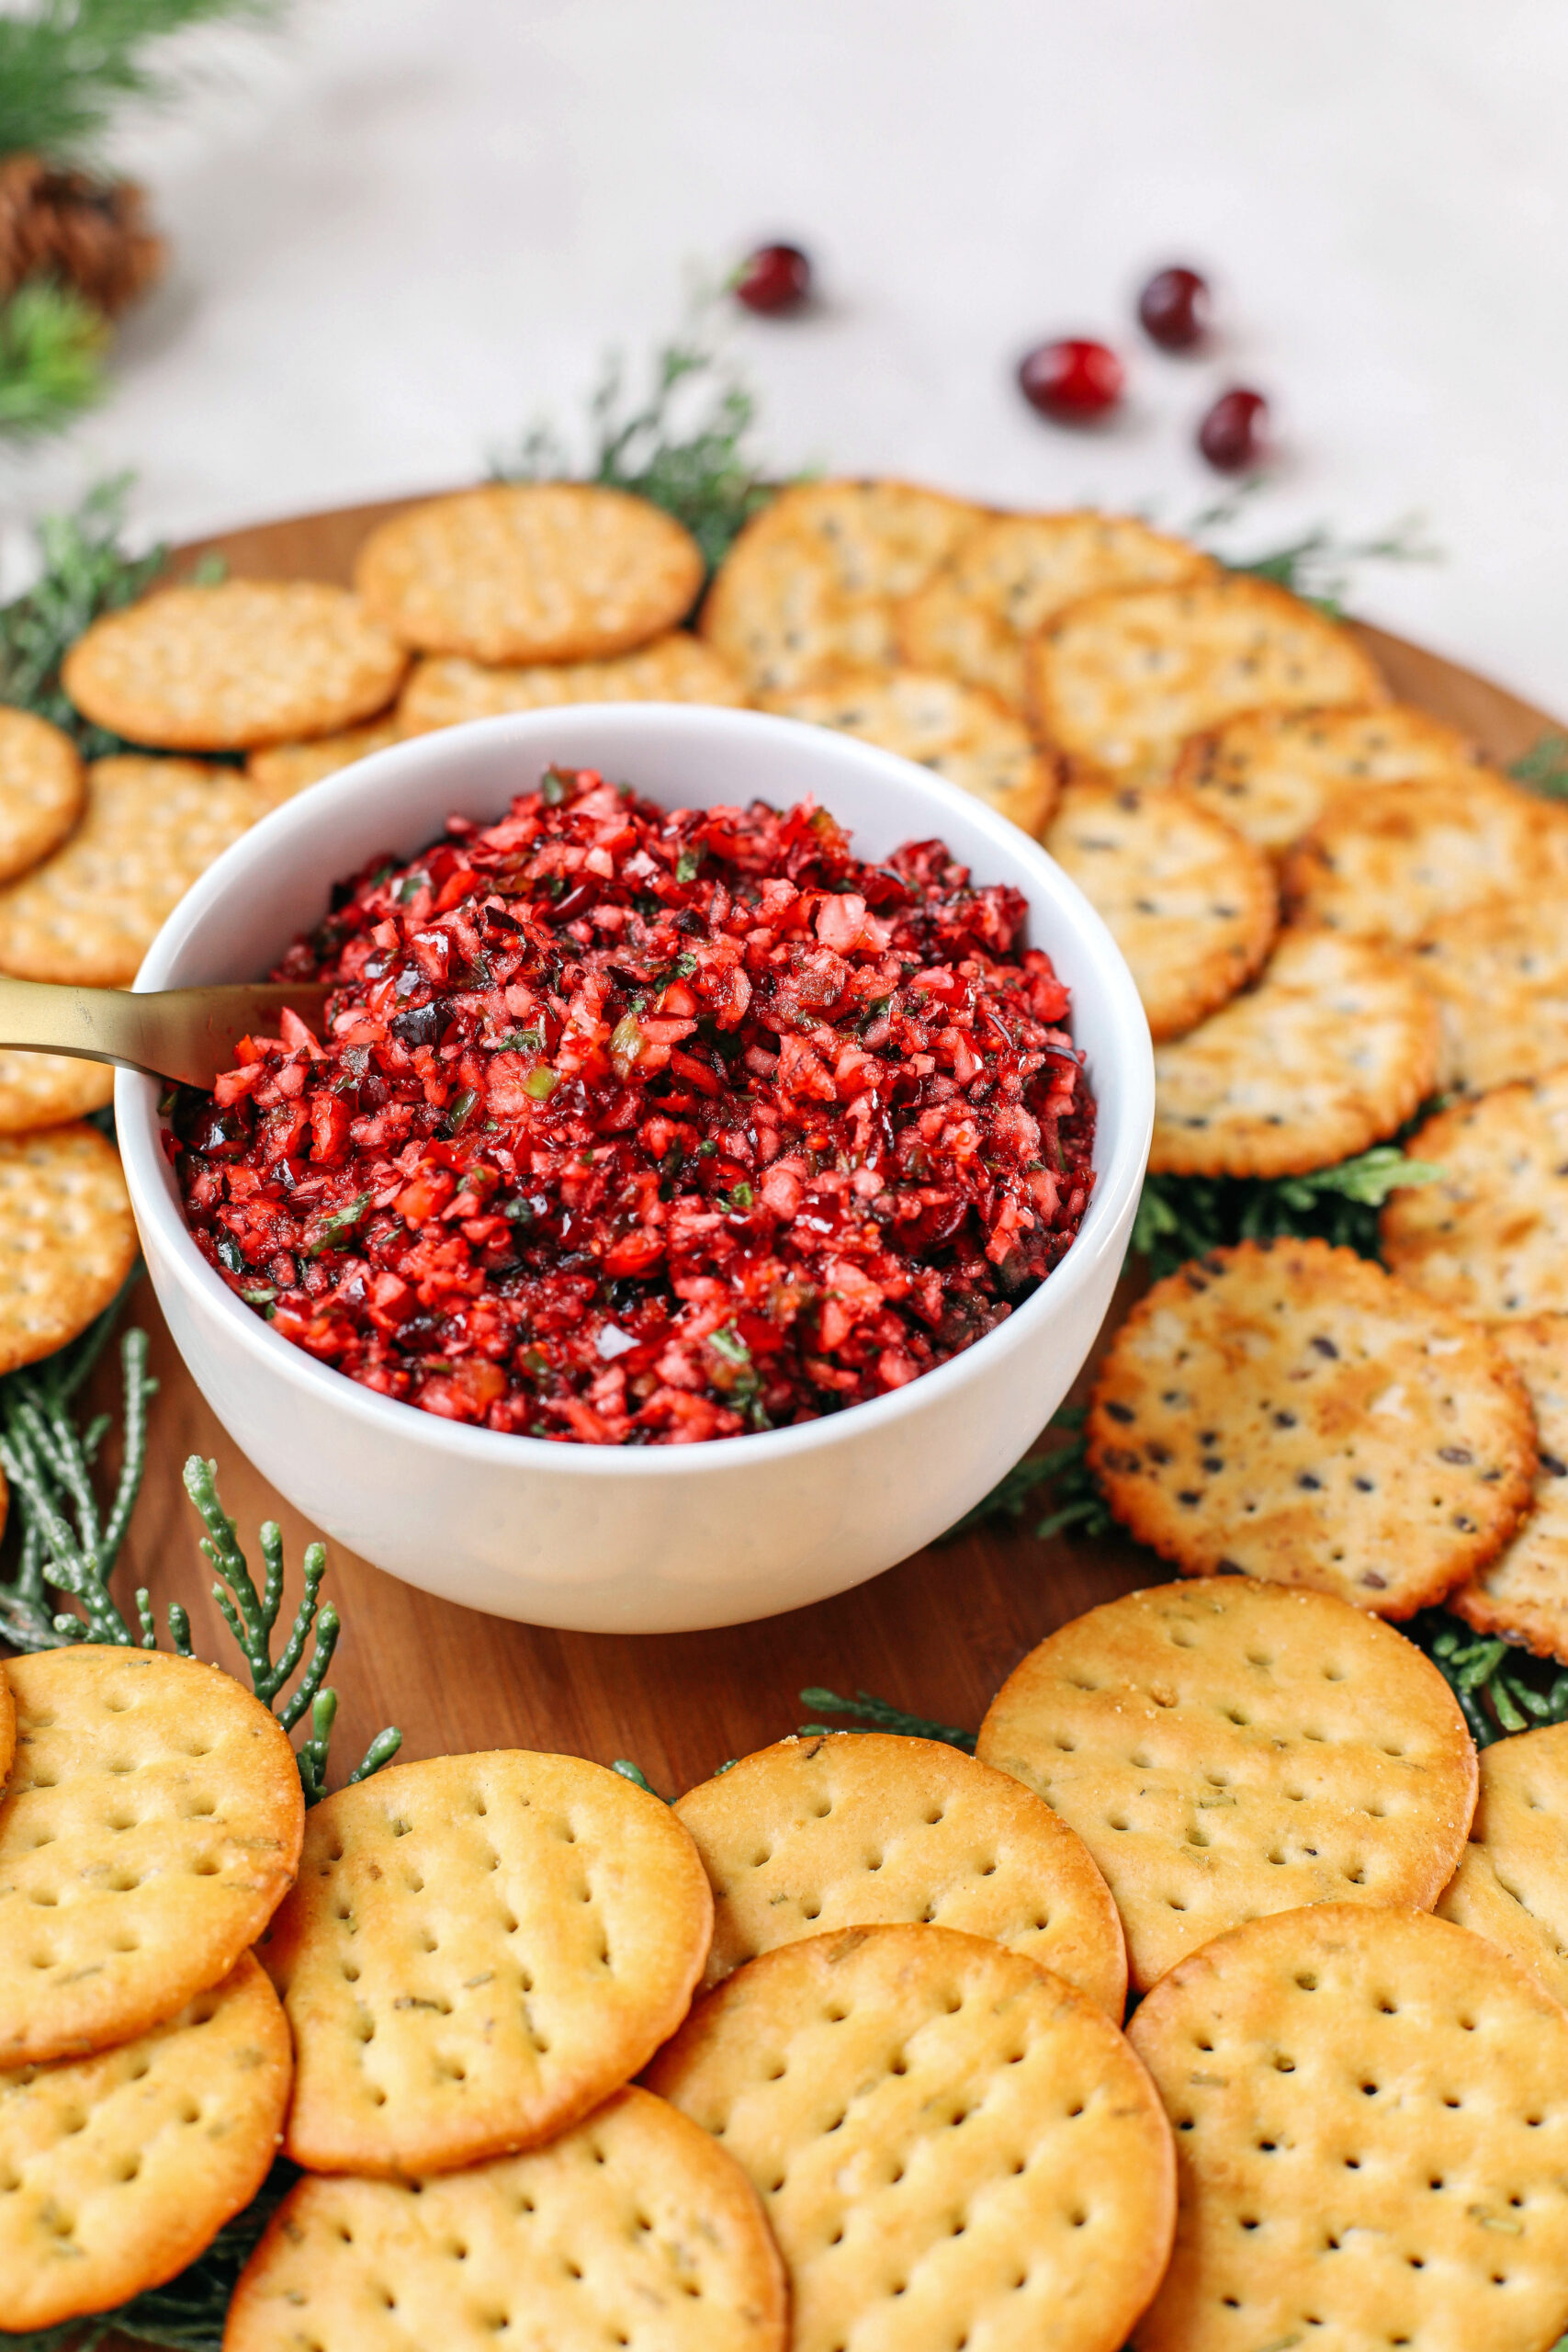 This sweet and spicy Cranberry Salsa makes the perfect holiday appetizer that is gluten-free, dairy-free, vegan and can be easily made in just minutes!